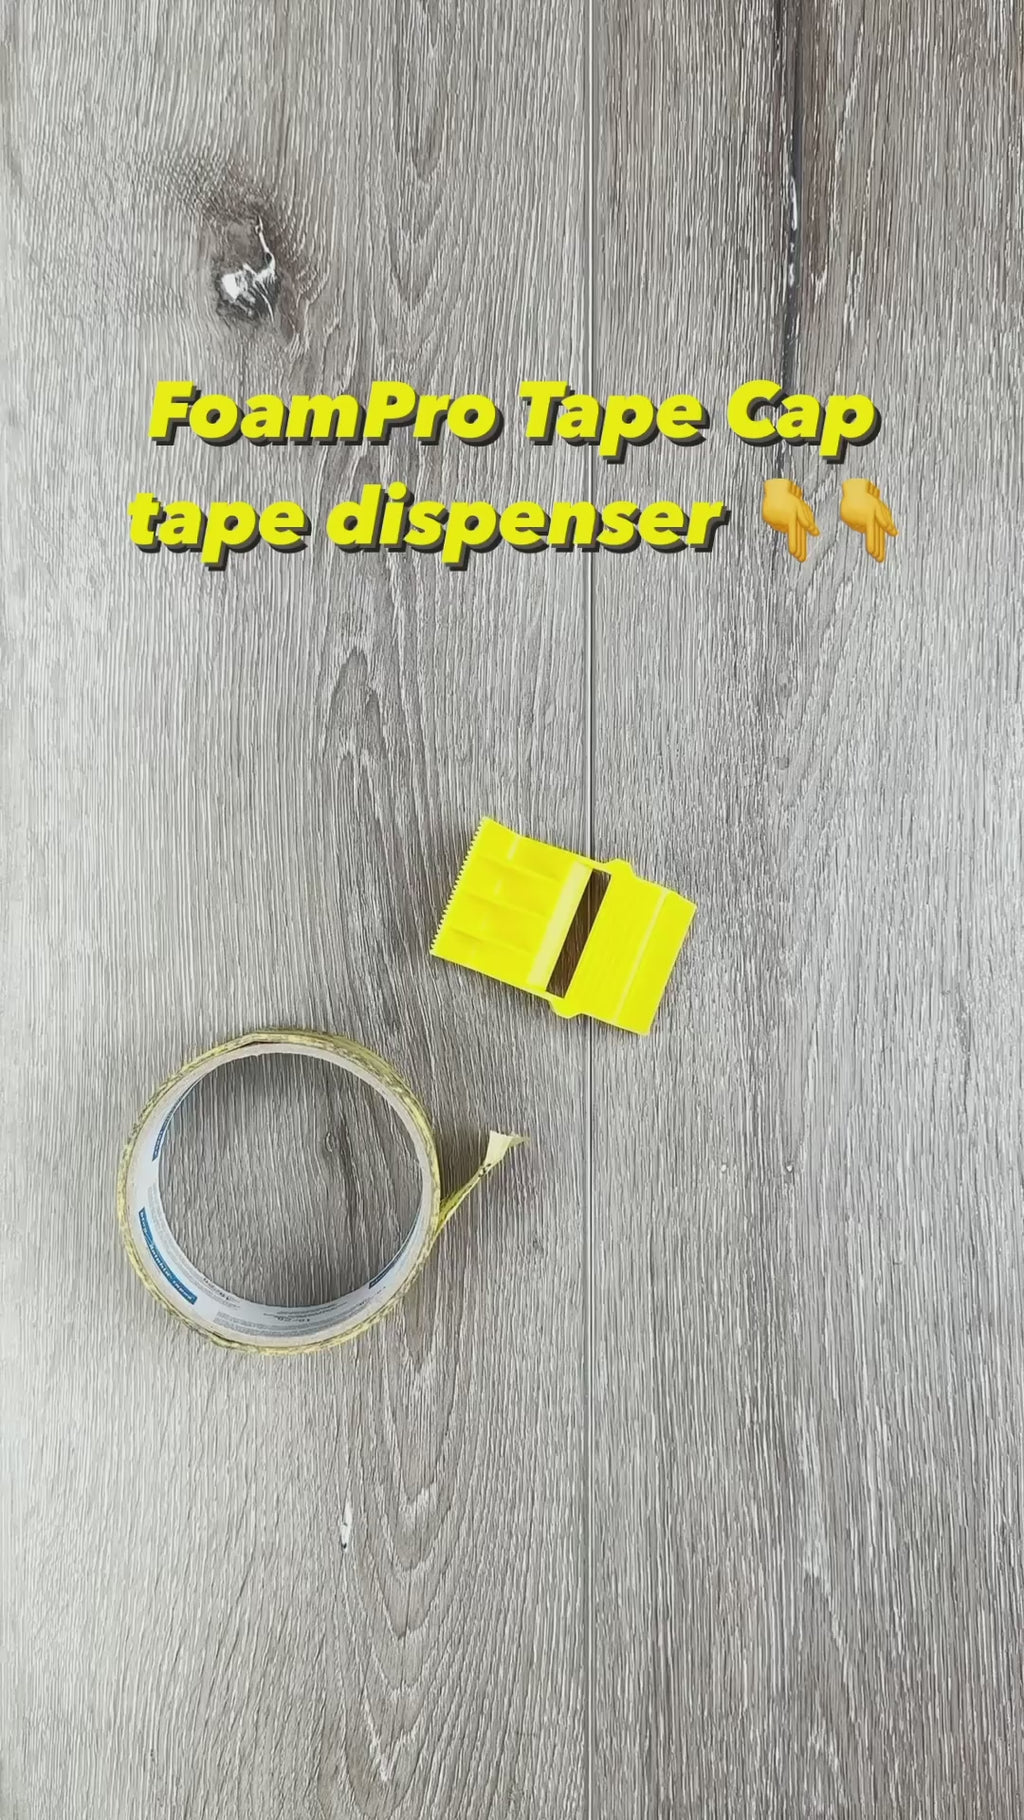 Foampro 149 Tape Cap Compact Tape Dispenser, 3-Pack for 1”, 1 1/2” and 2”  Masking and Painter's Tape | DIY Painting Accessories | Tape Corners,  Create